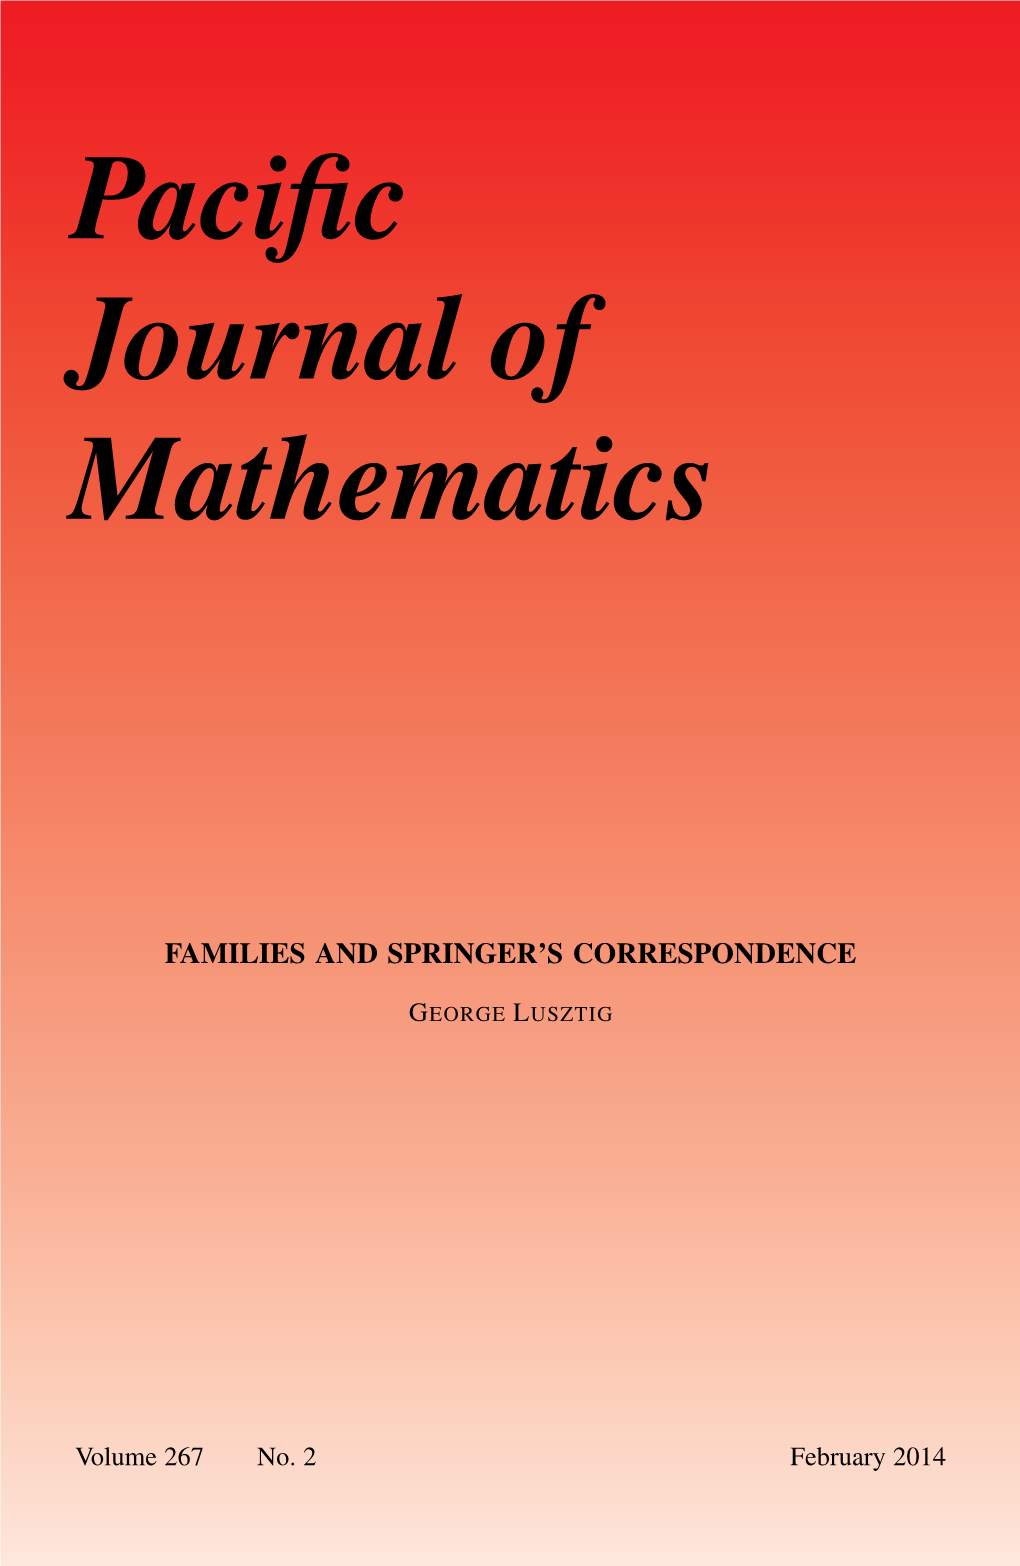 Families and Springer's Correspondence